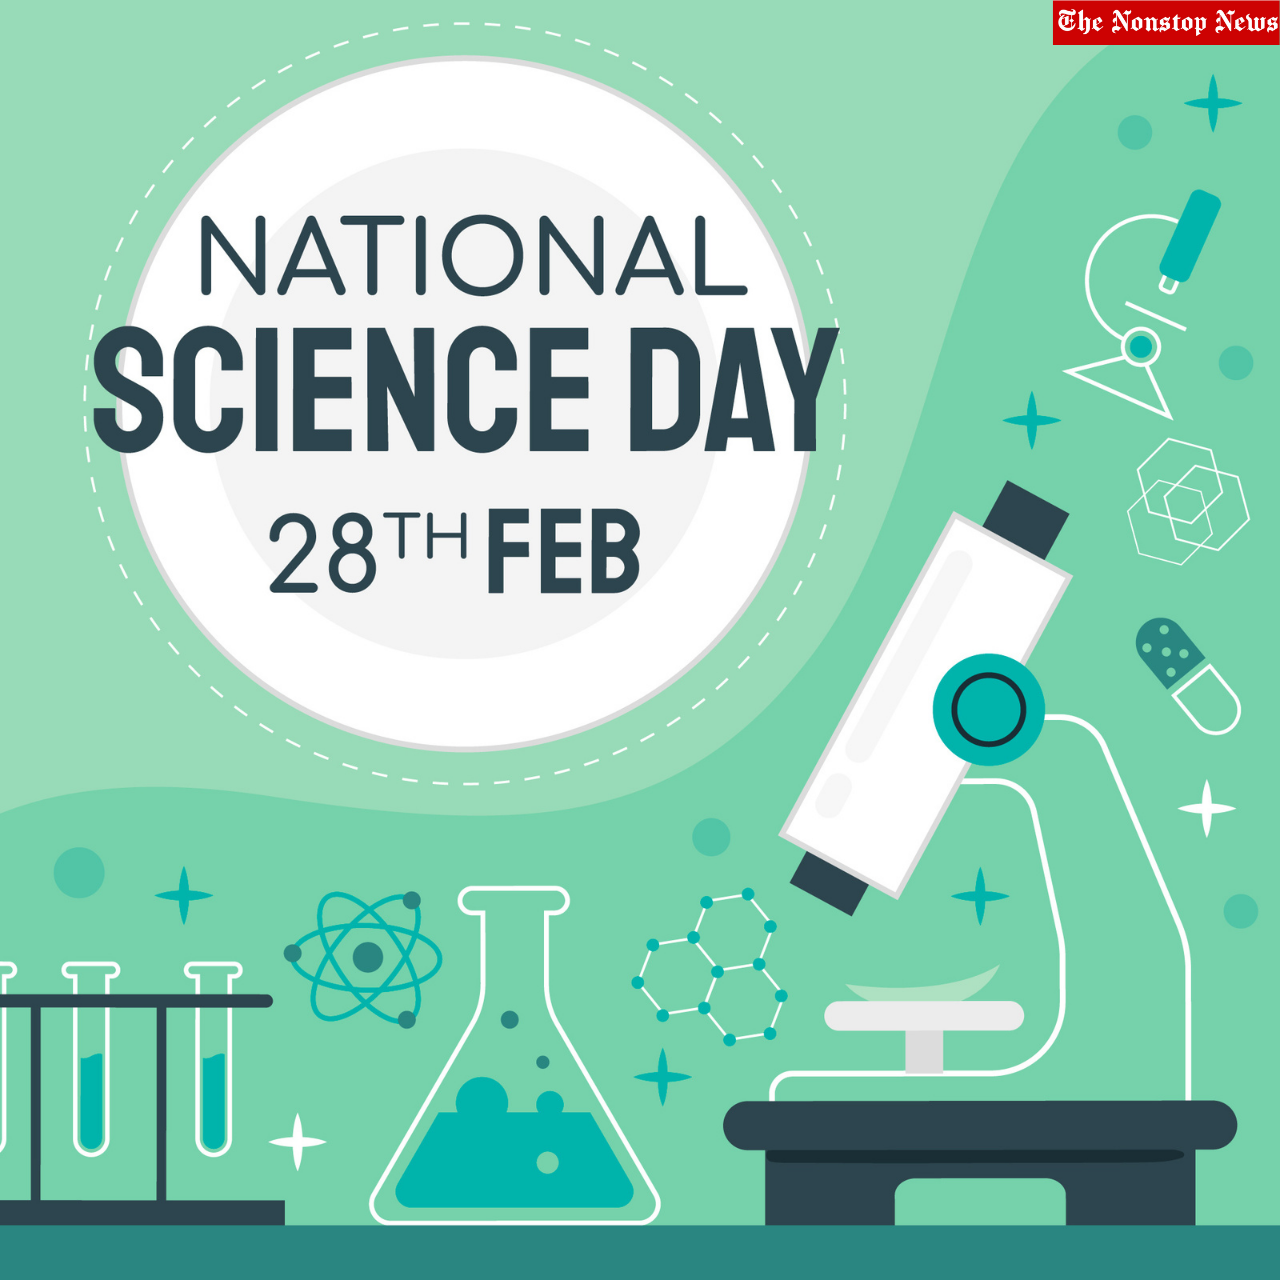 National Science Day 2022 Instagram Captions, Facebook Greetings, WhatsApp Quotes, Twitter Posts, WhatsApp Status to Share